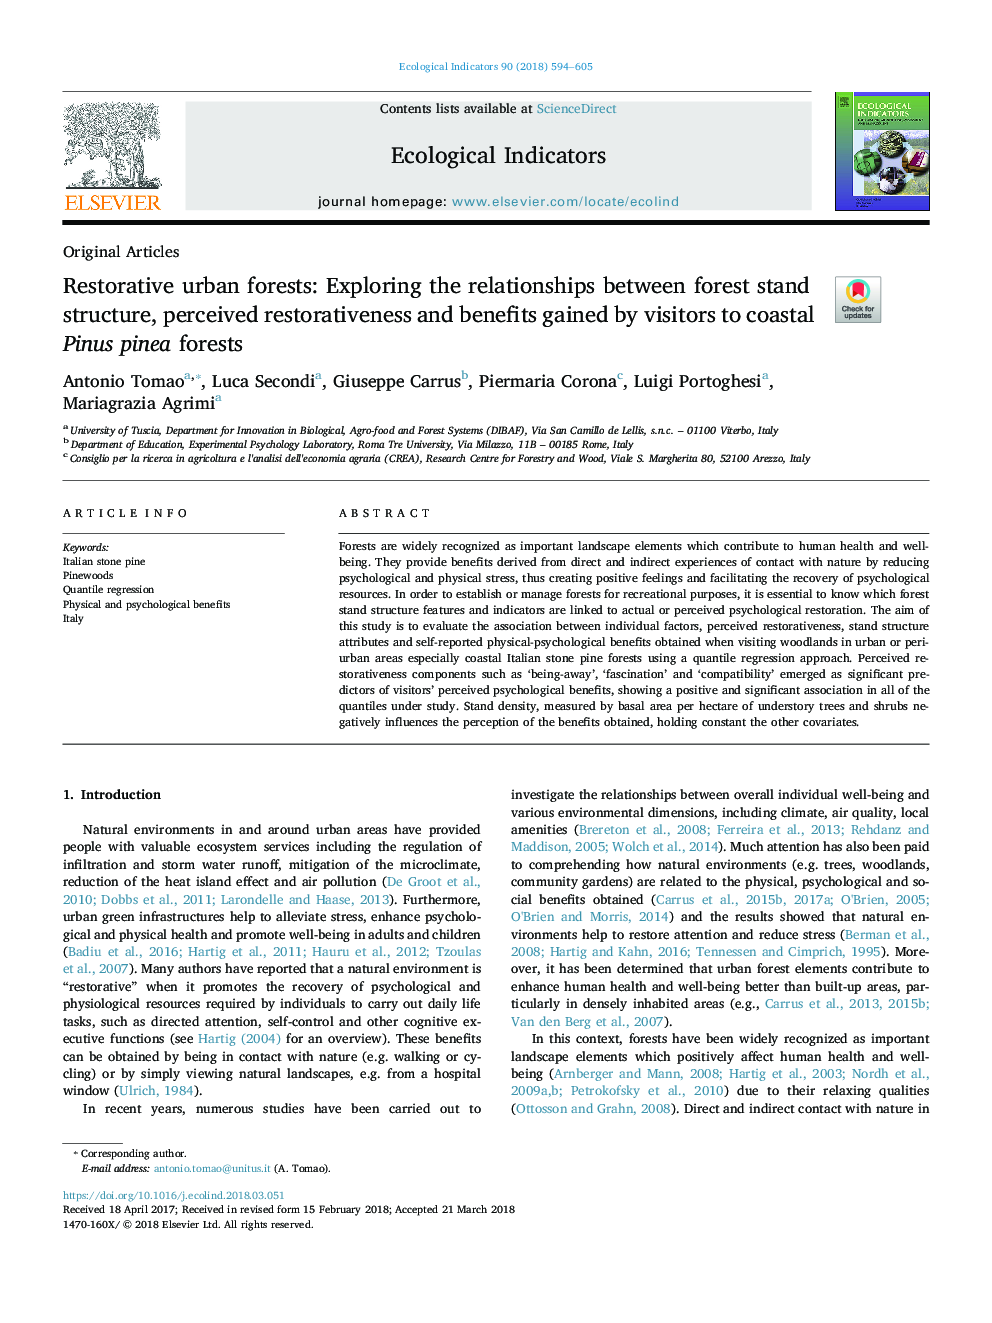 Restorative urban forests: Exploring the relationships between forest stand structure, perceived restorativeness and benefits gained by visitors to coastal Pinus pinea forests